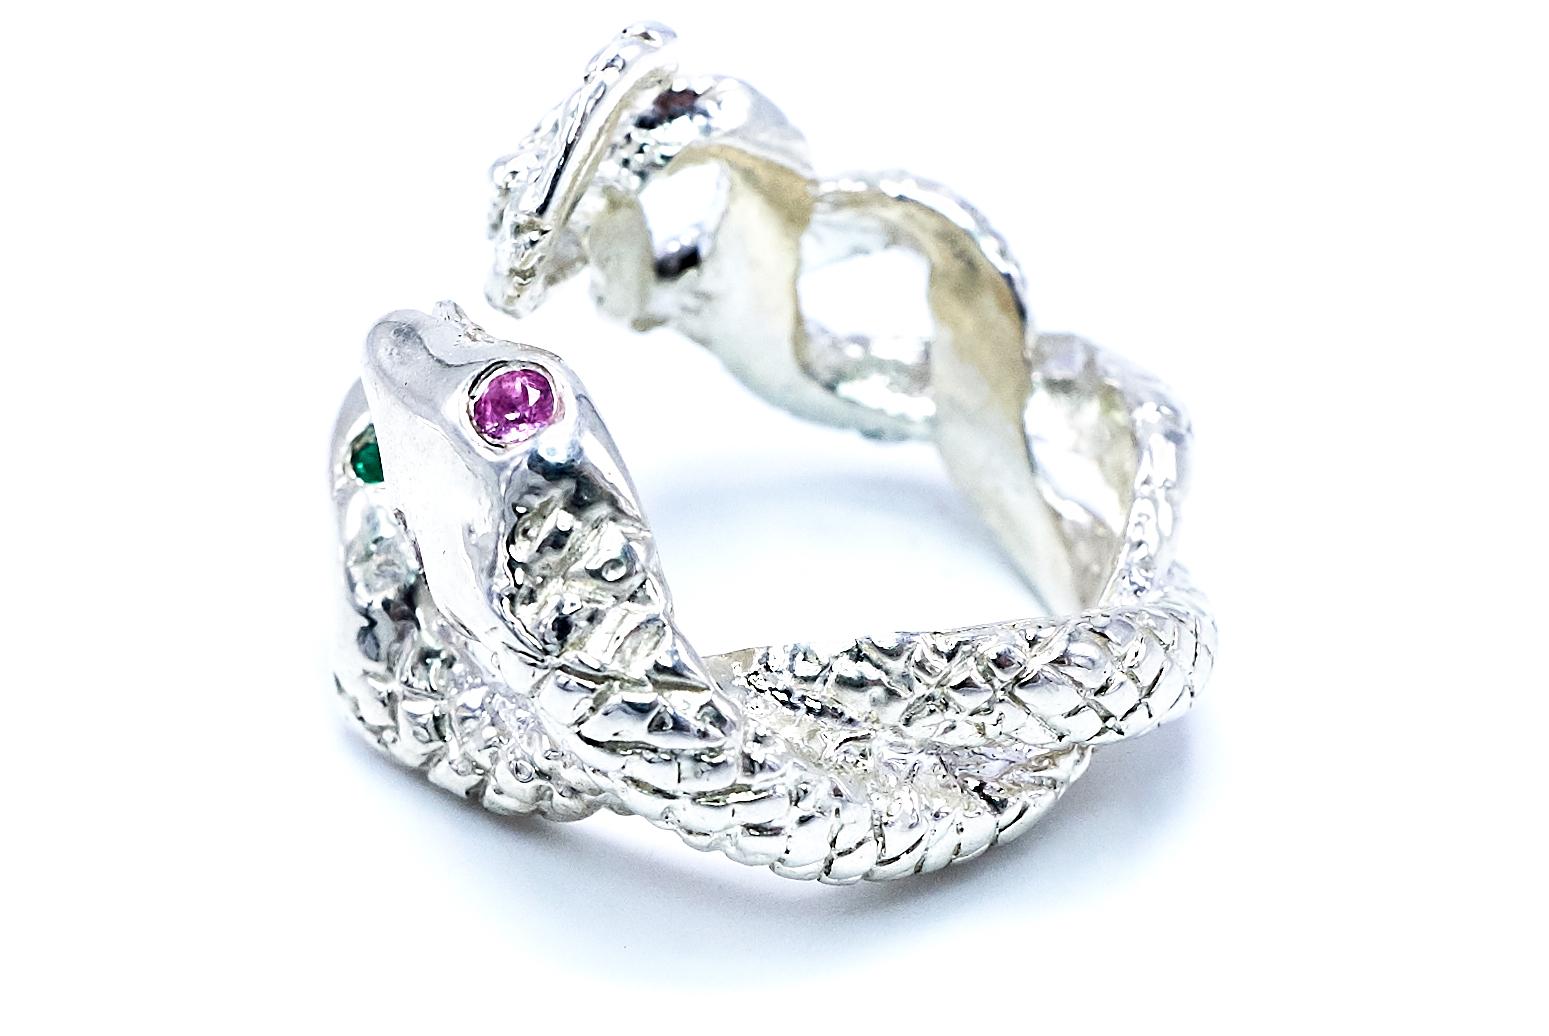 Snake Ring Emerald Pink Sapphire Sterling Silver Statement Cocktail J Dauphin For Sale 2